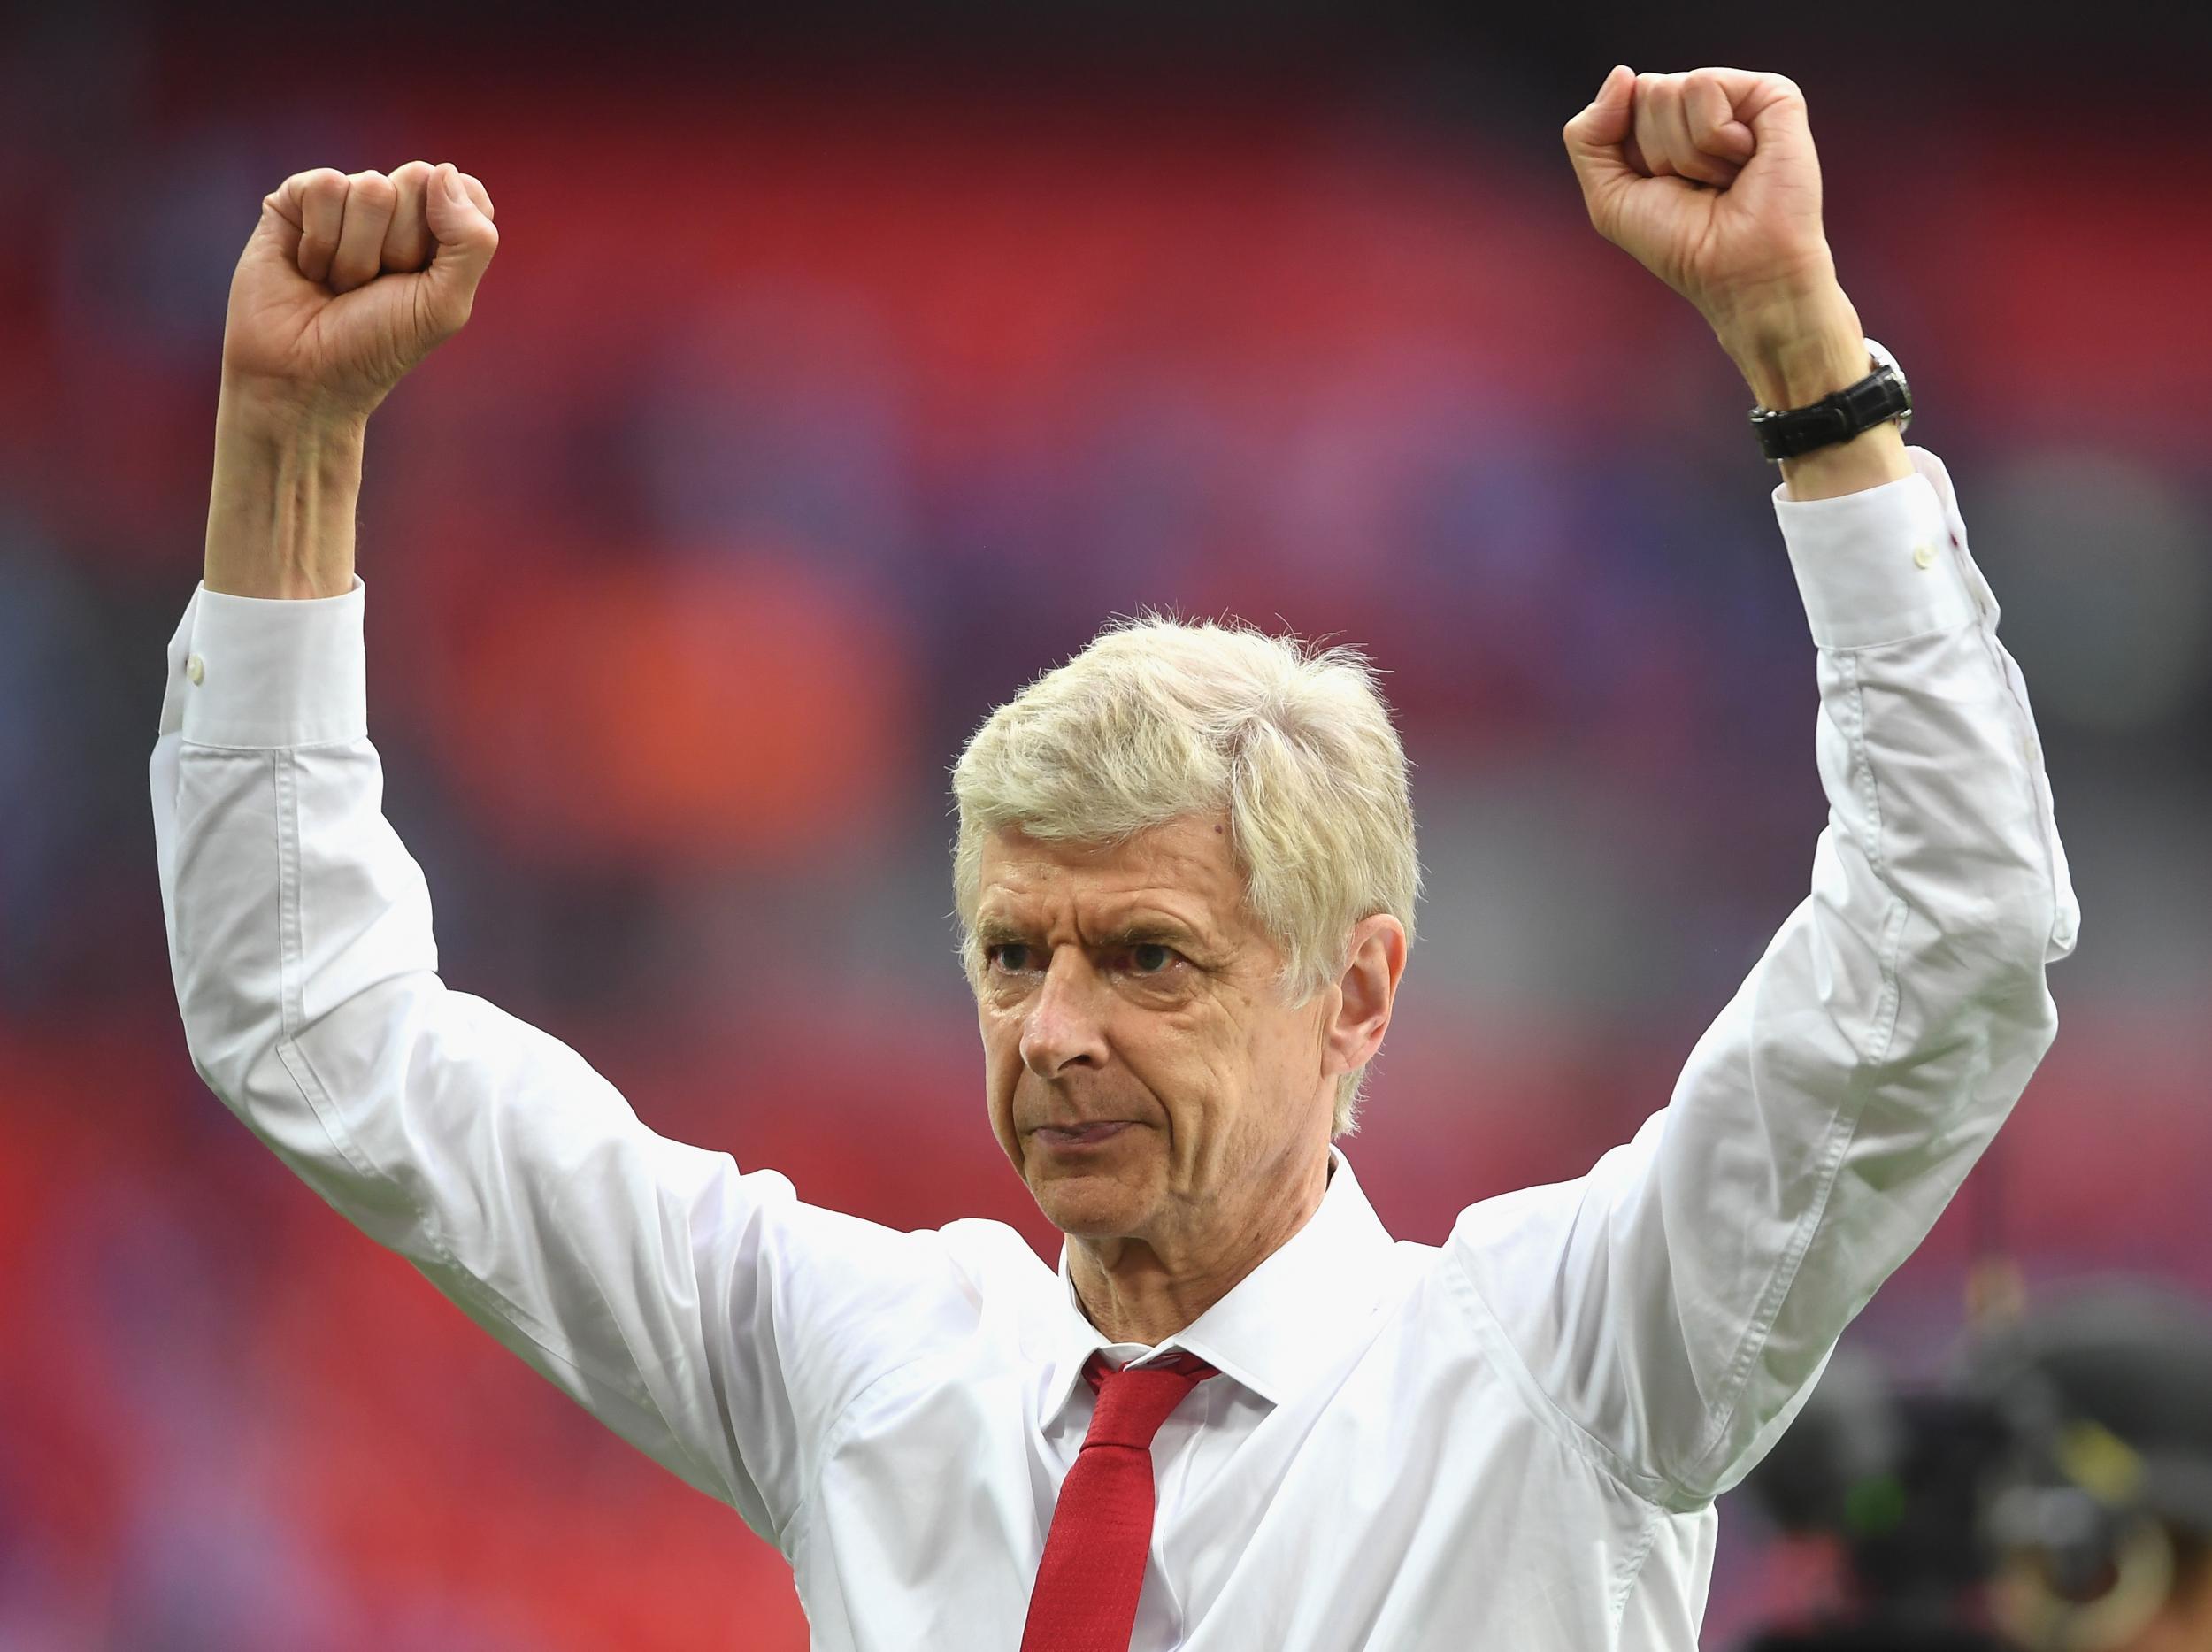 Wenger celebrates at the end of the match